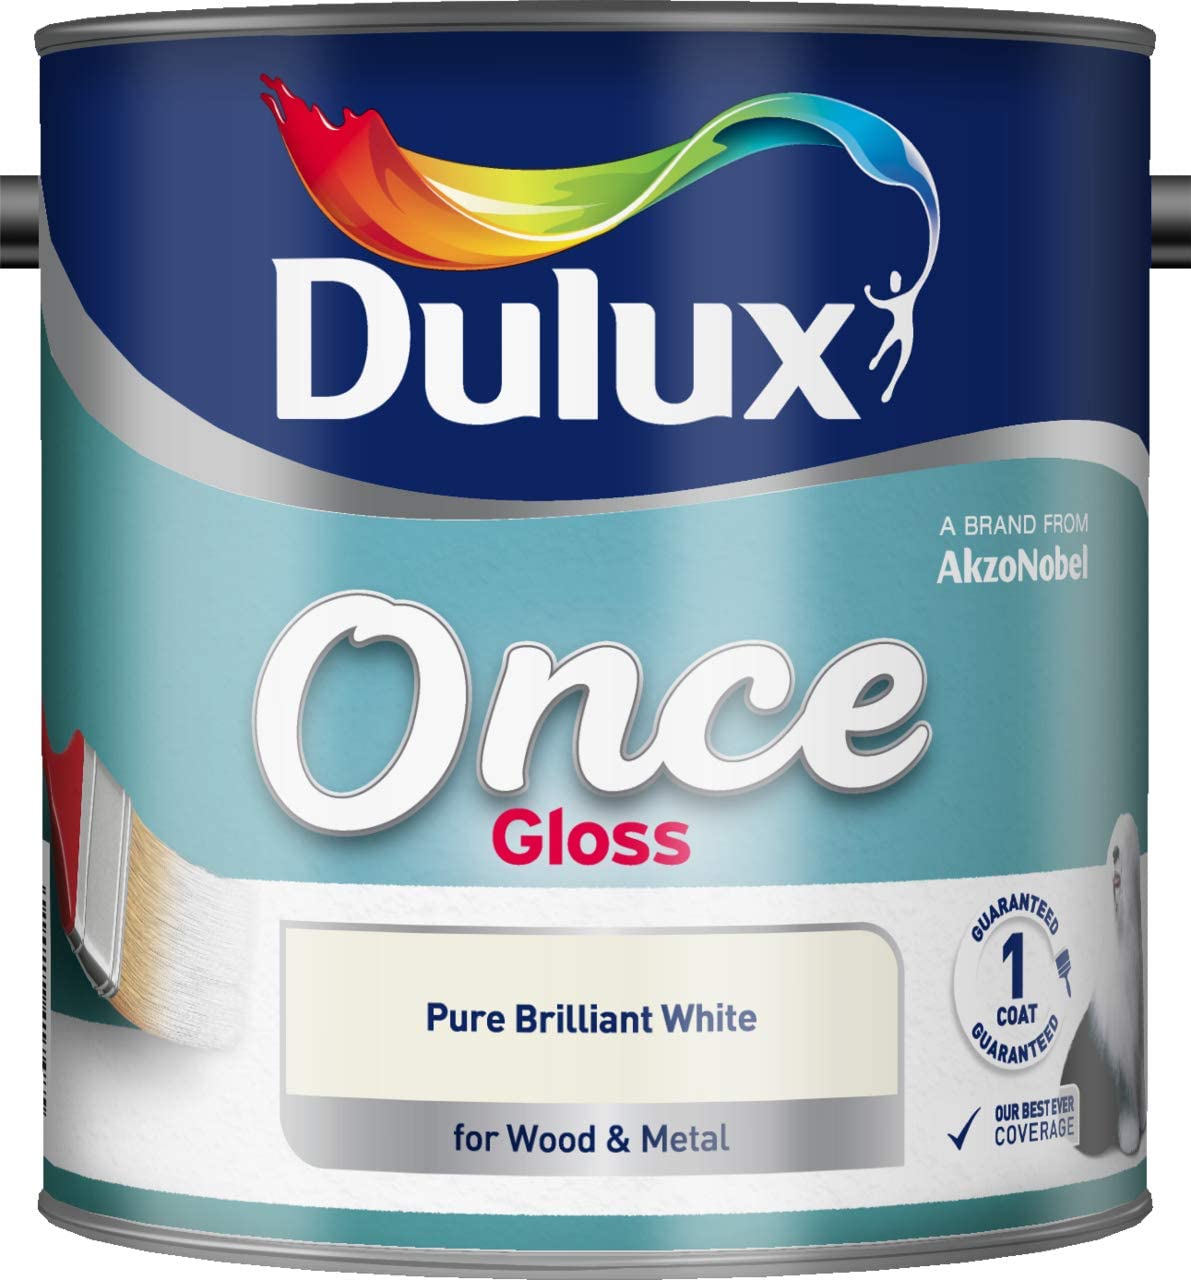 Dulux once gloss paint